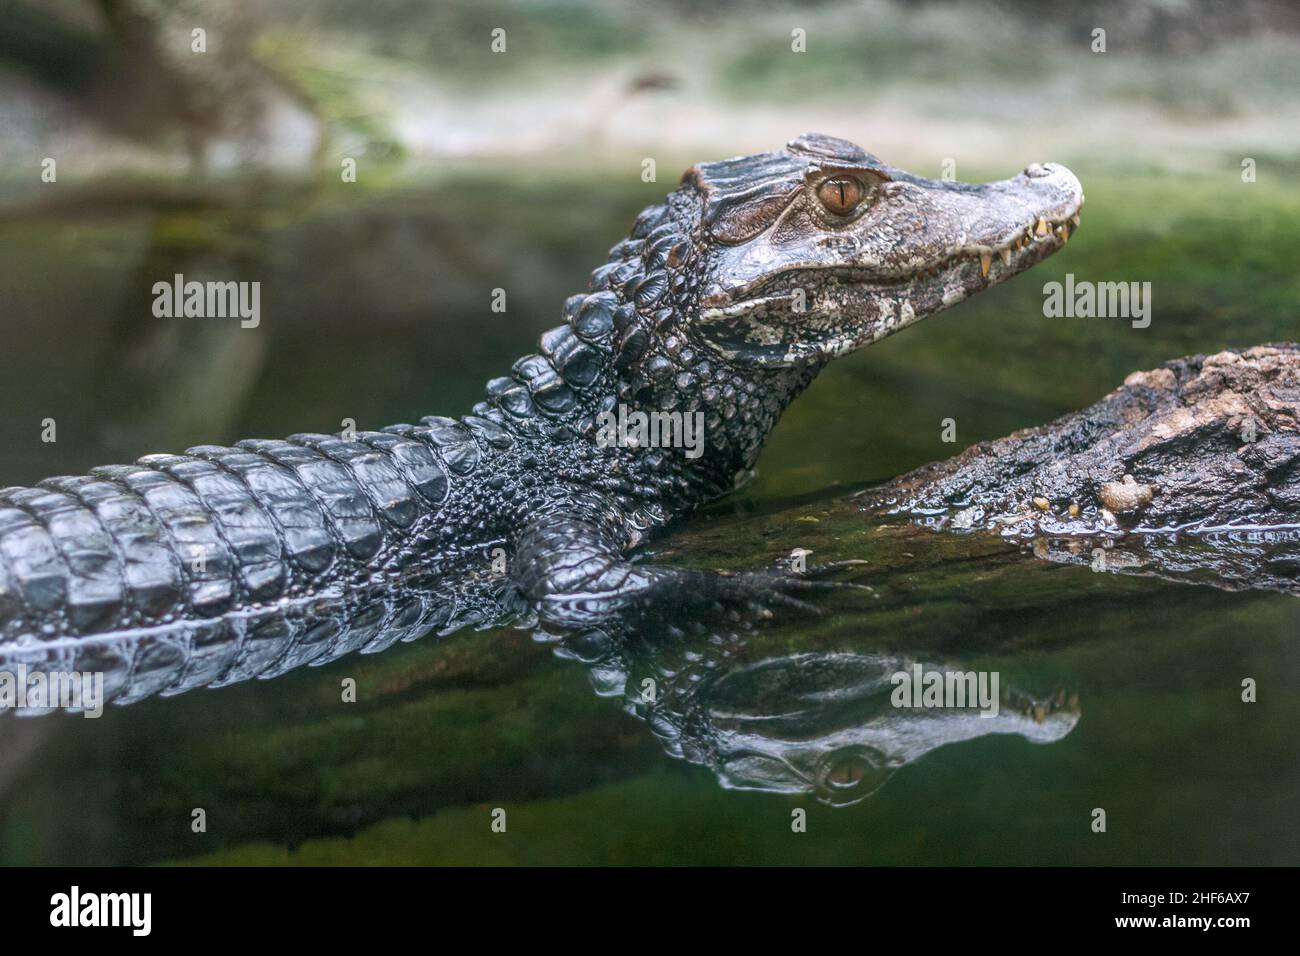 Reflection of The spectacled caiman - Caiman crocodilus in water. Stock Photo